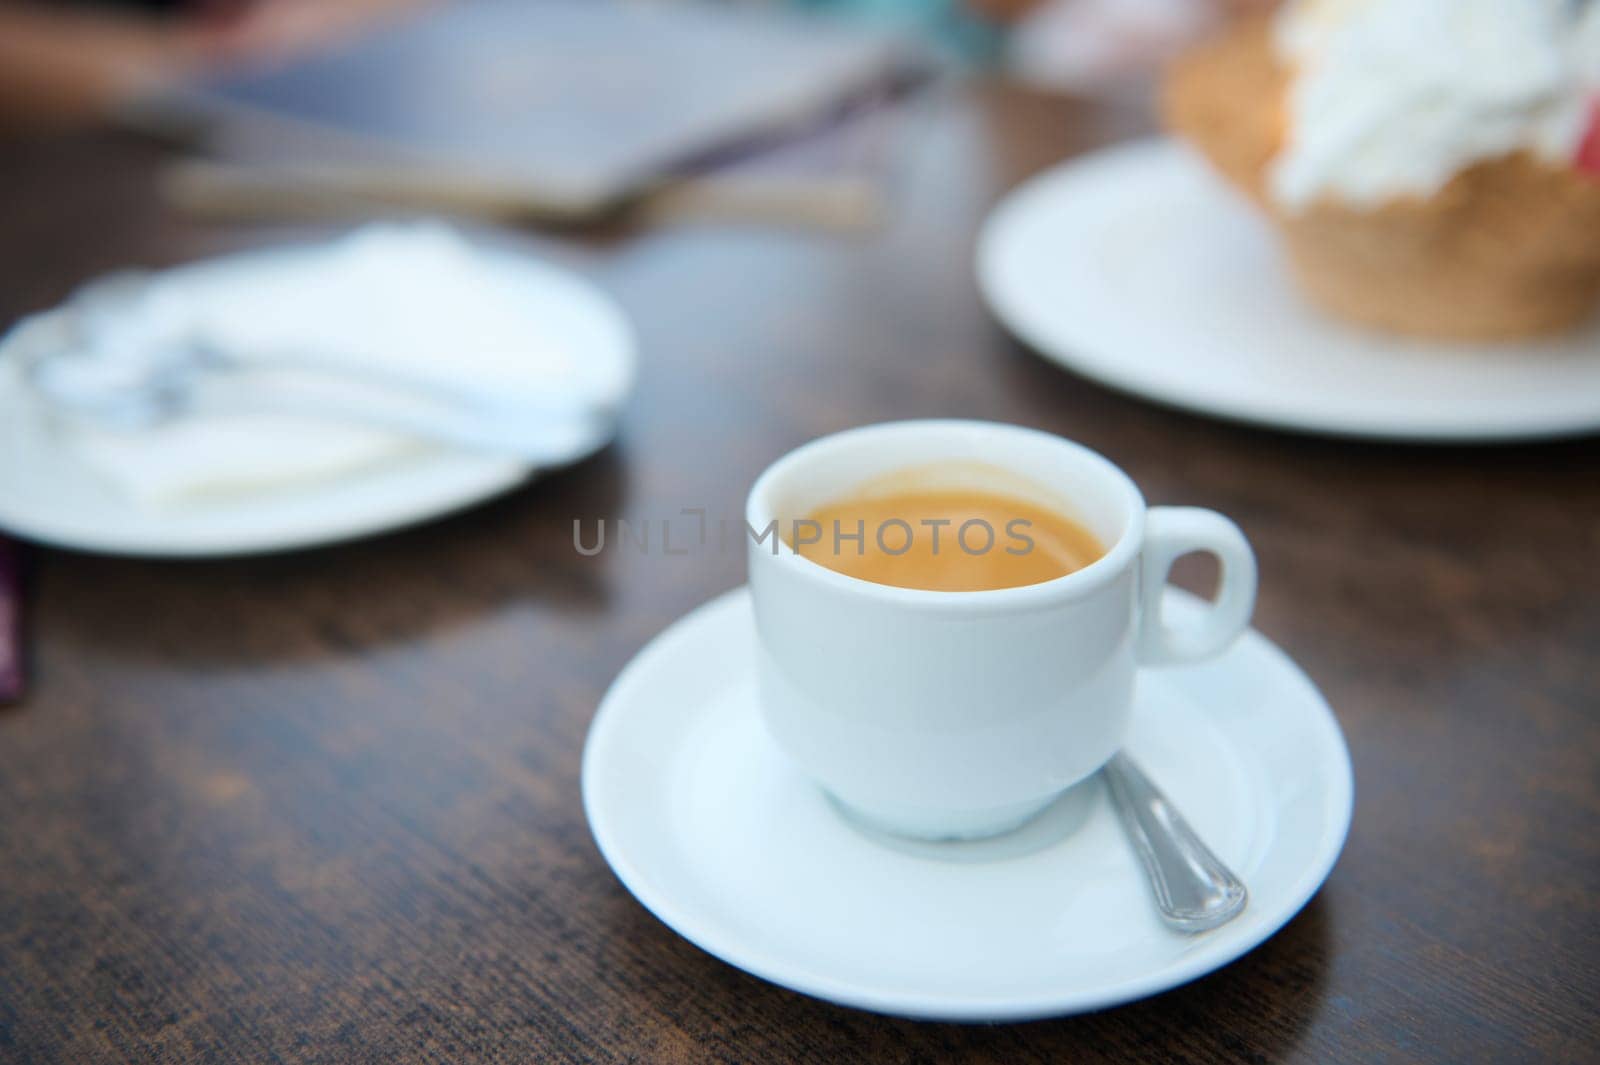 A close-up shot of a white coffee cup on a wooden table in a cafe. The image portrays a calm and relaxing atmosphere.